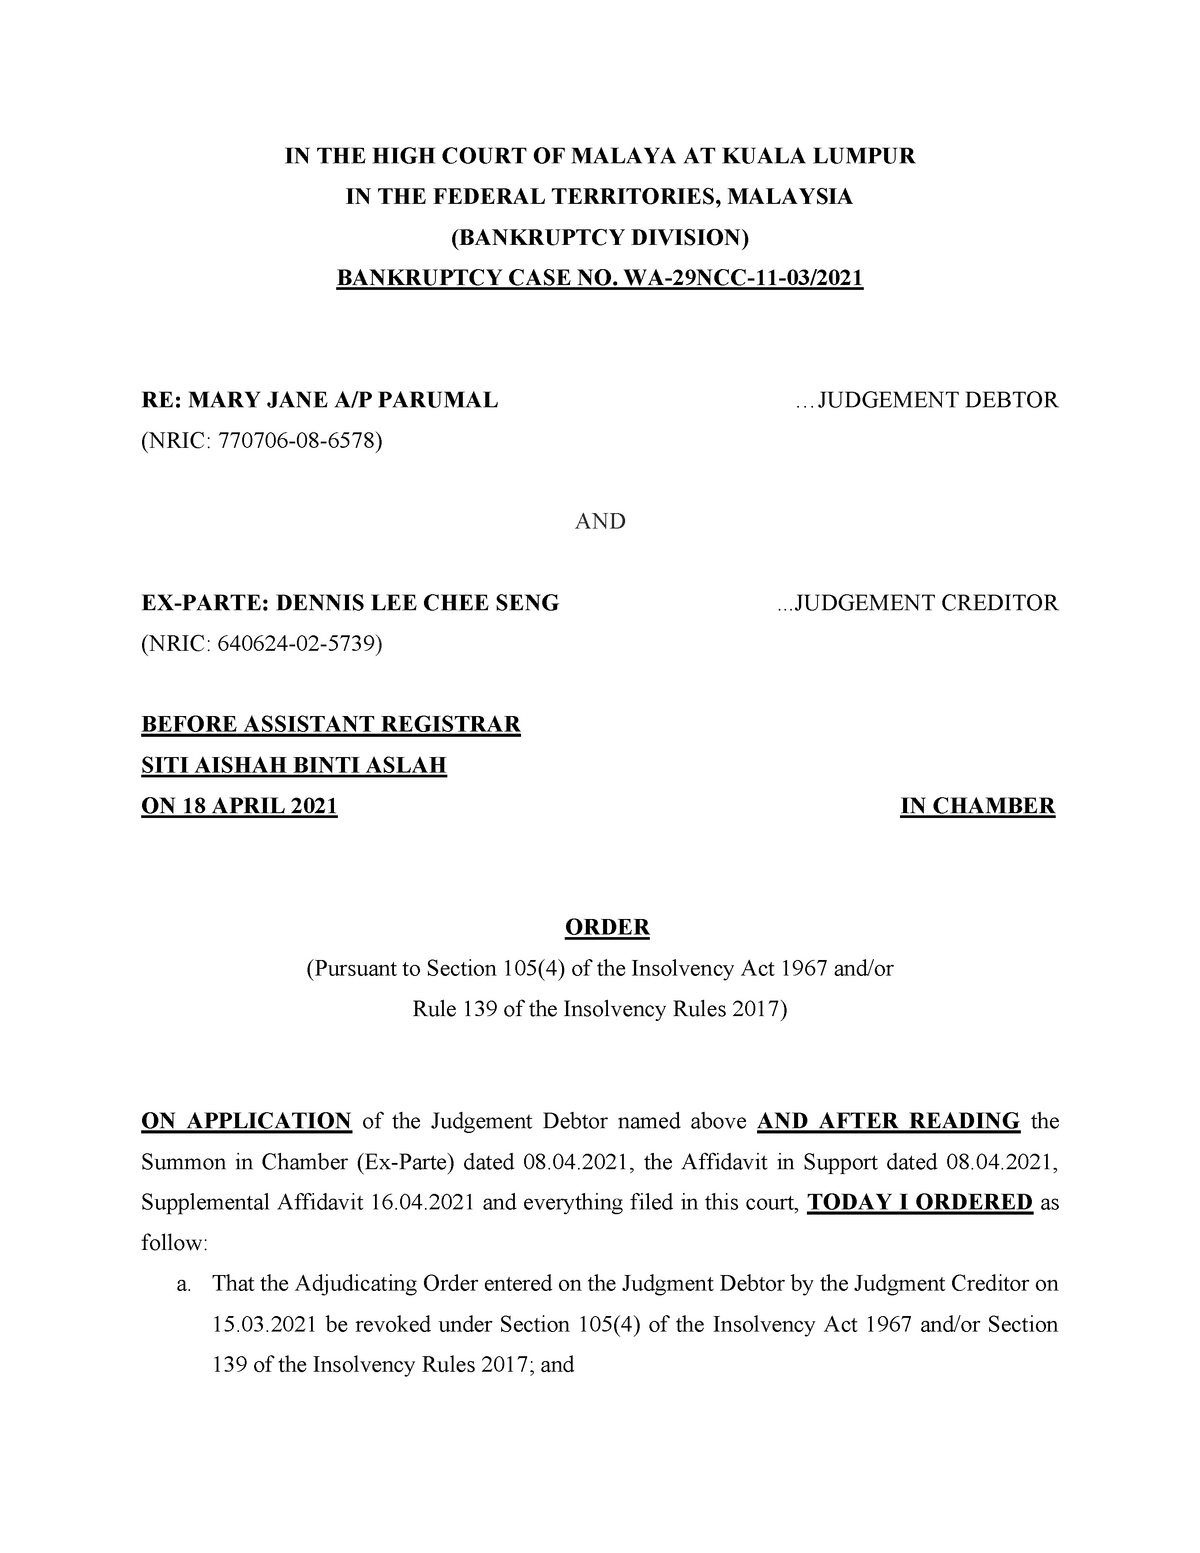 Example of Court Order in Term (Cause Paper) - IN THE HIGH COURT OF